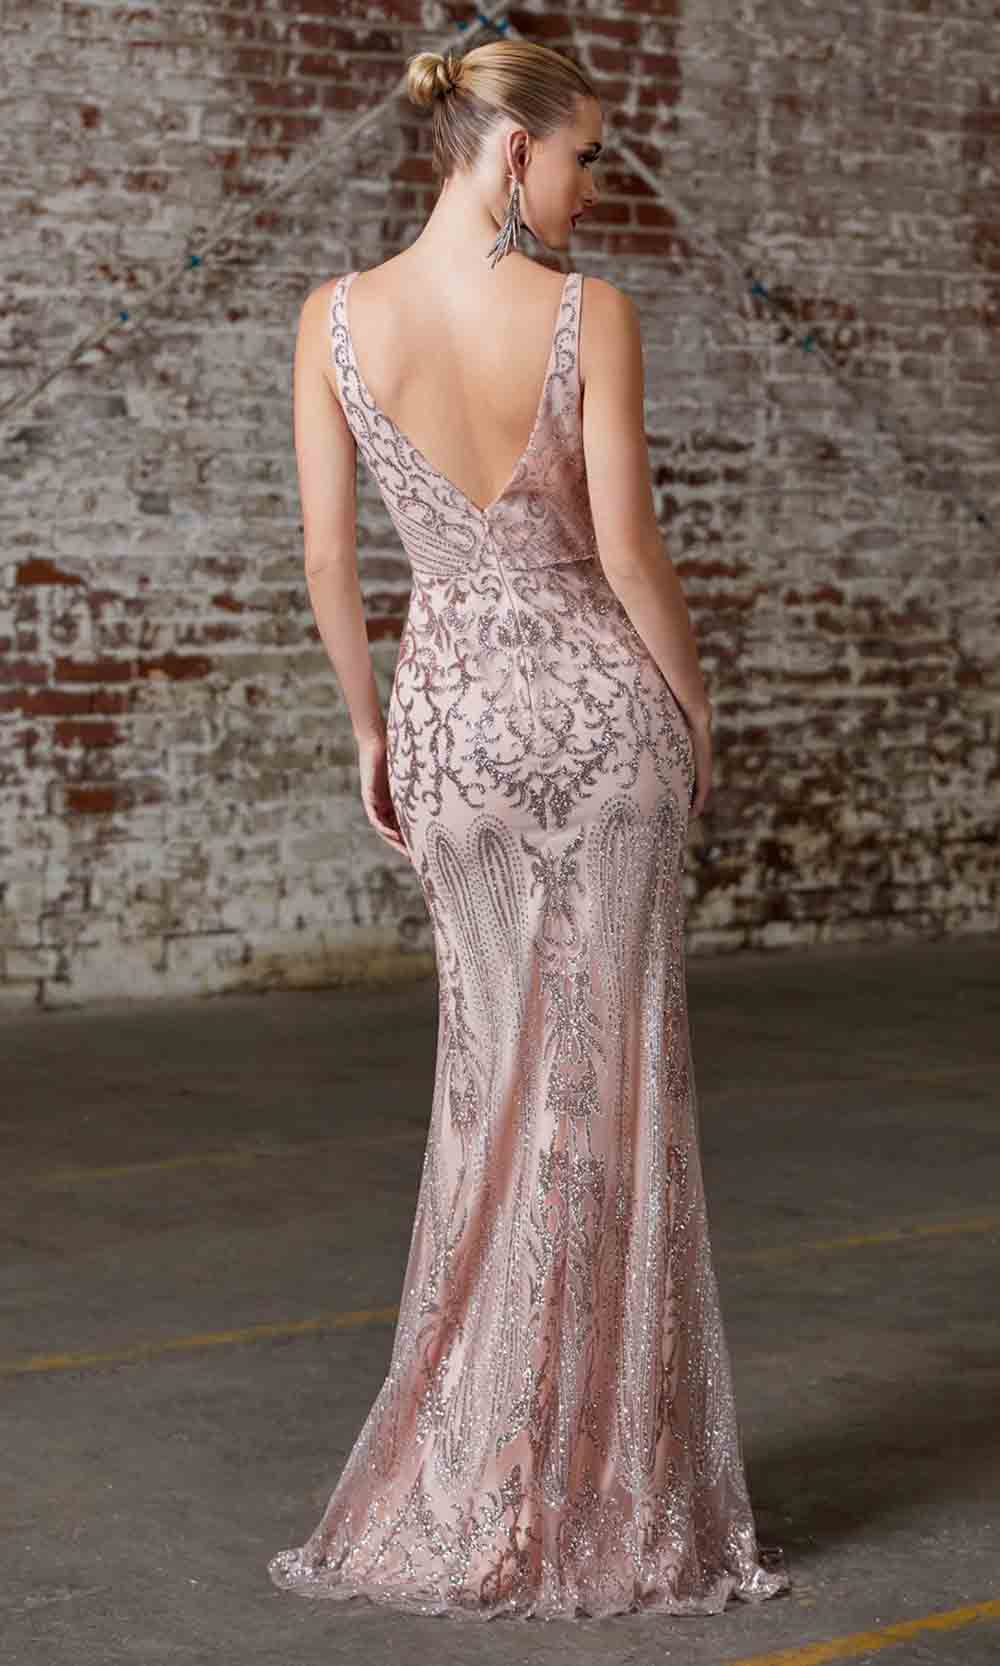 Cinderella Divine - CD0161 V Neck Glittered Sheath Gown In Pink and Gold